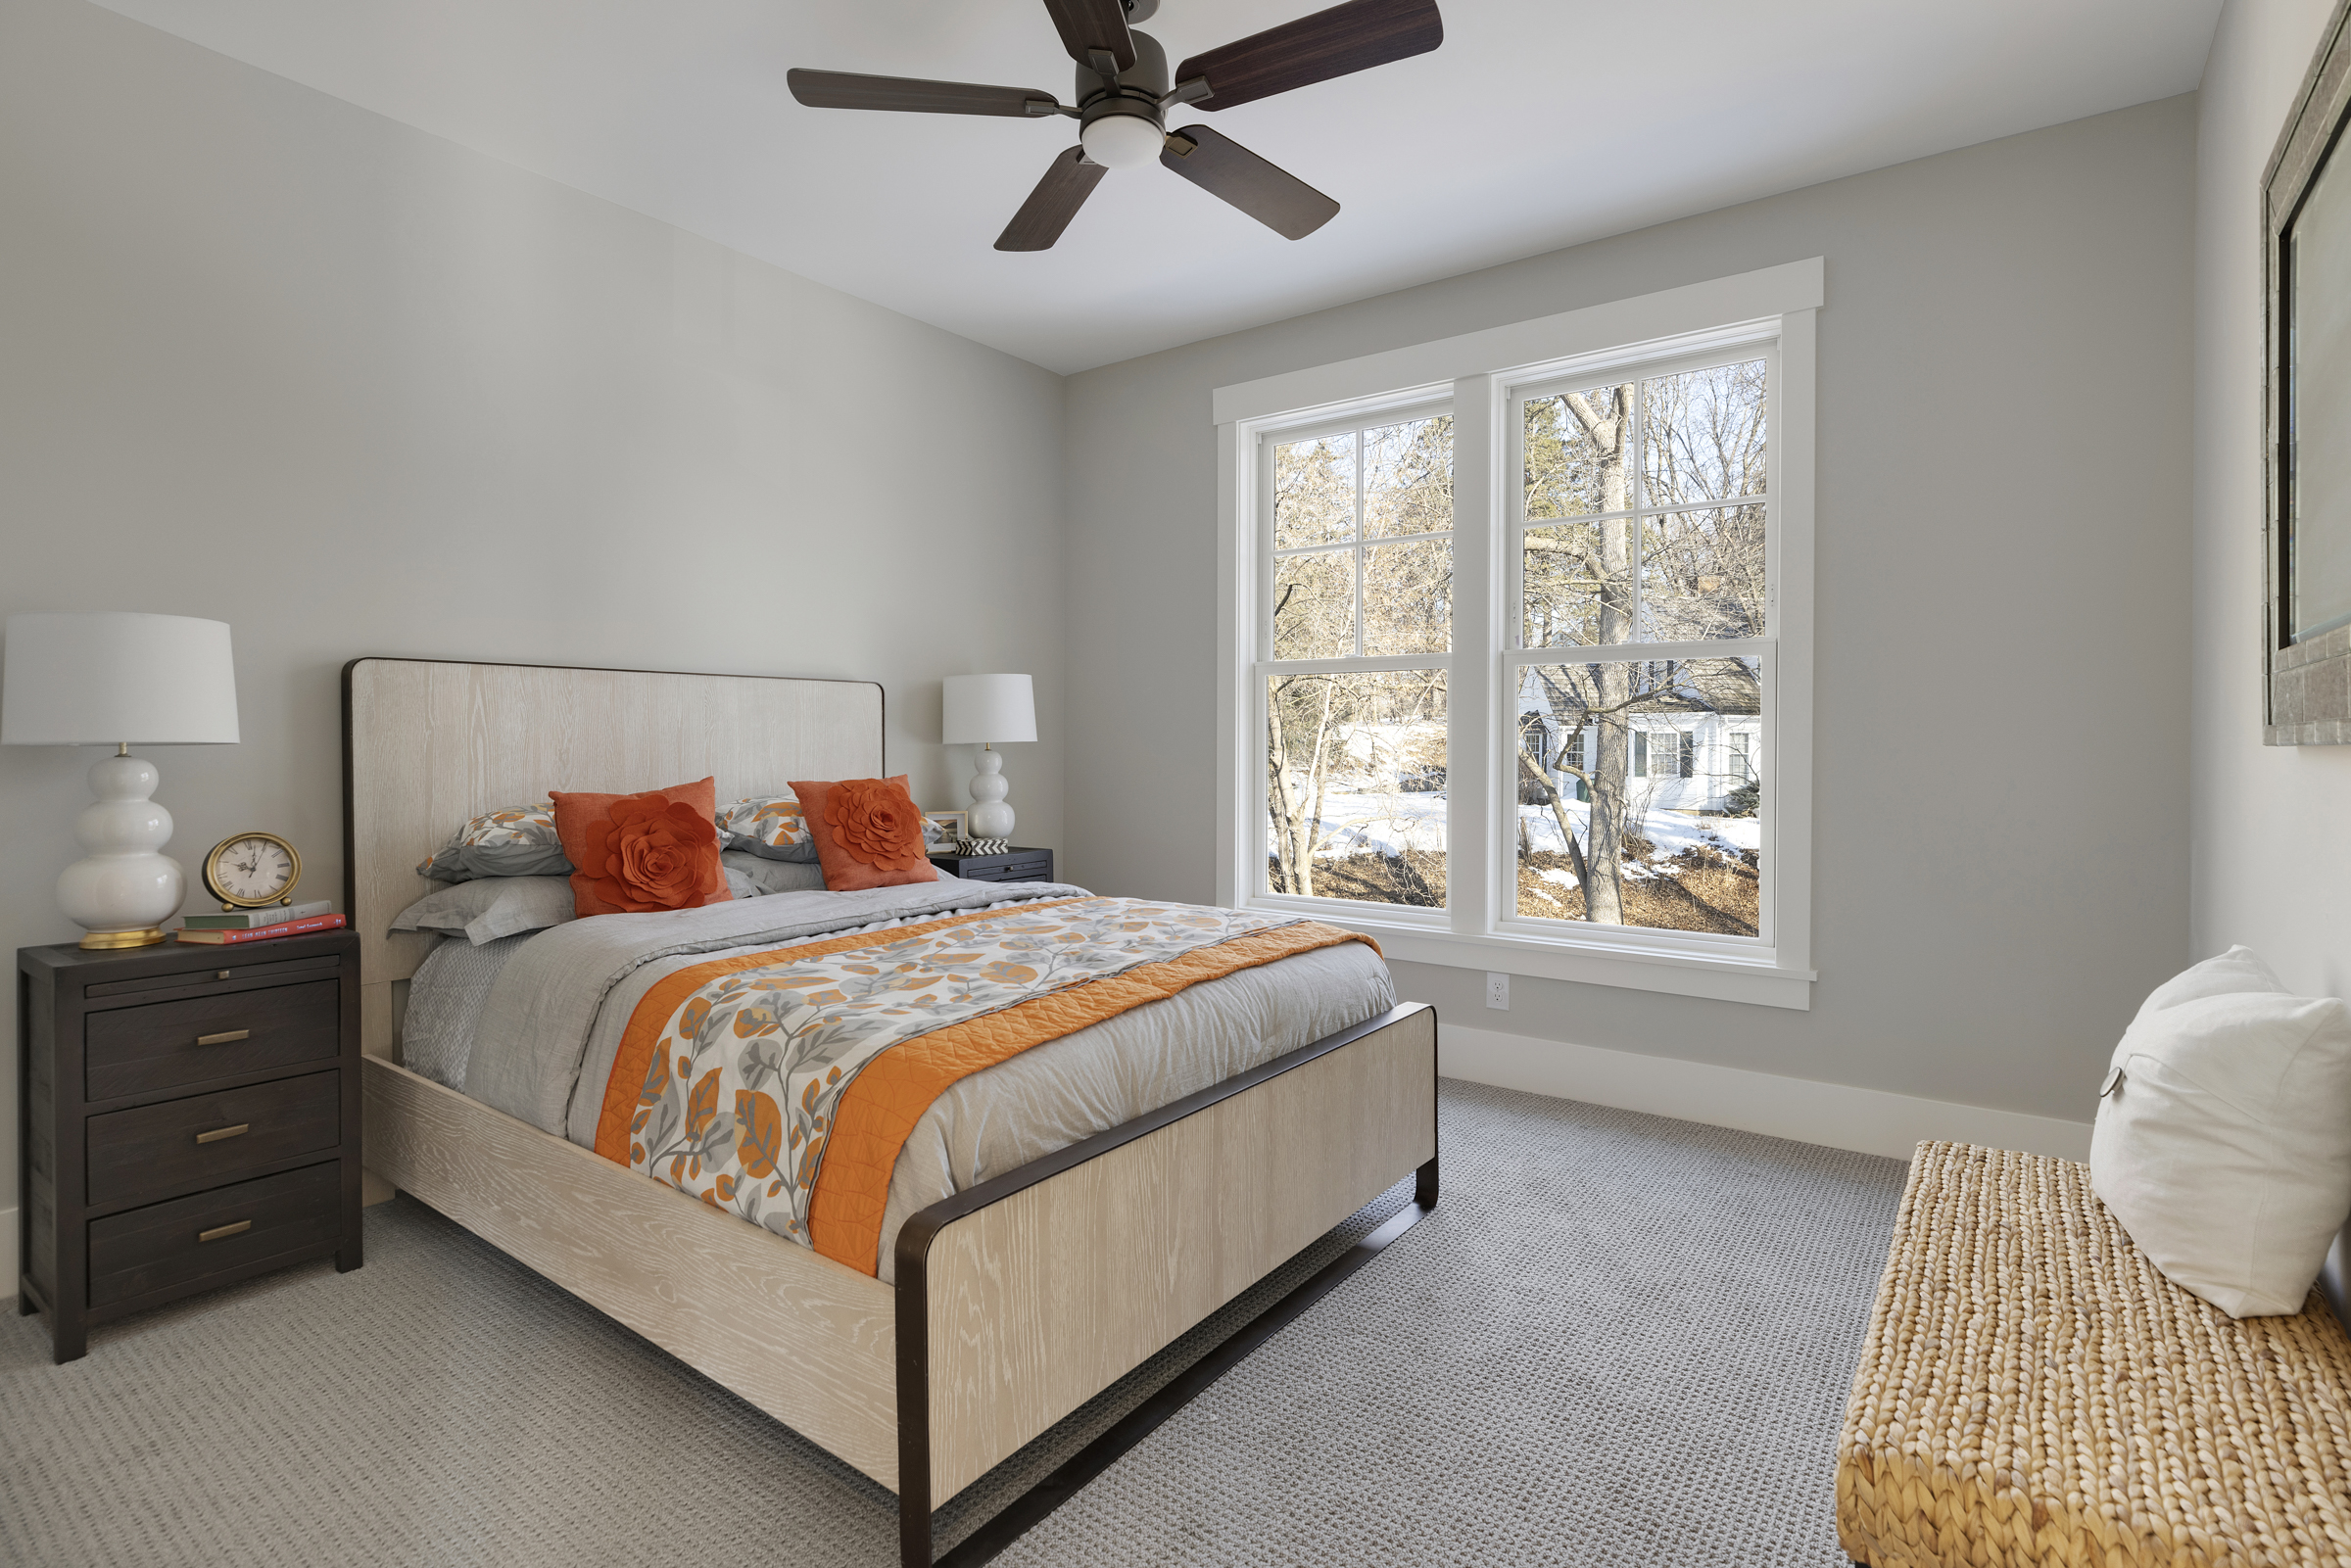 A bedroom with gray walls and orange accents.